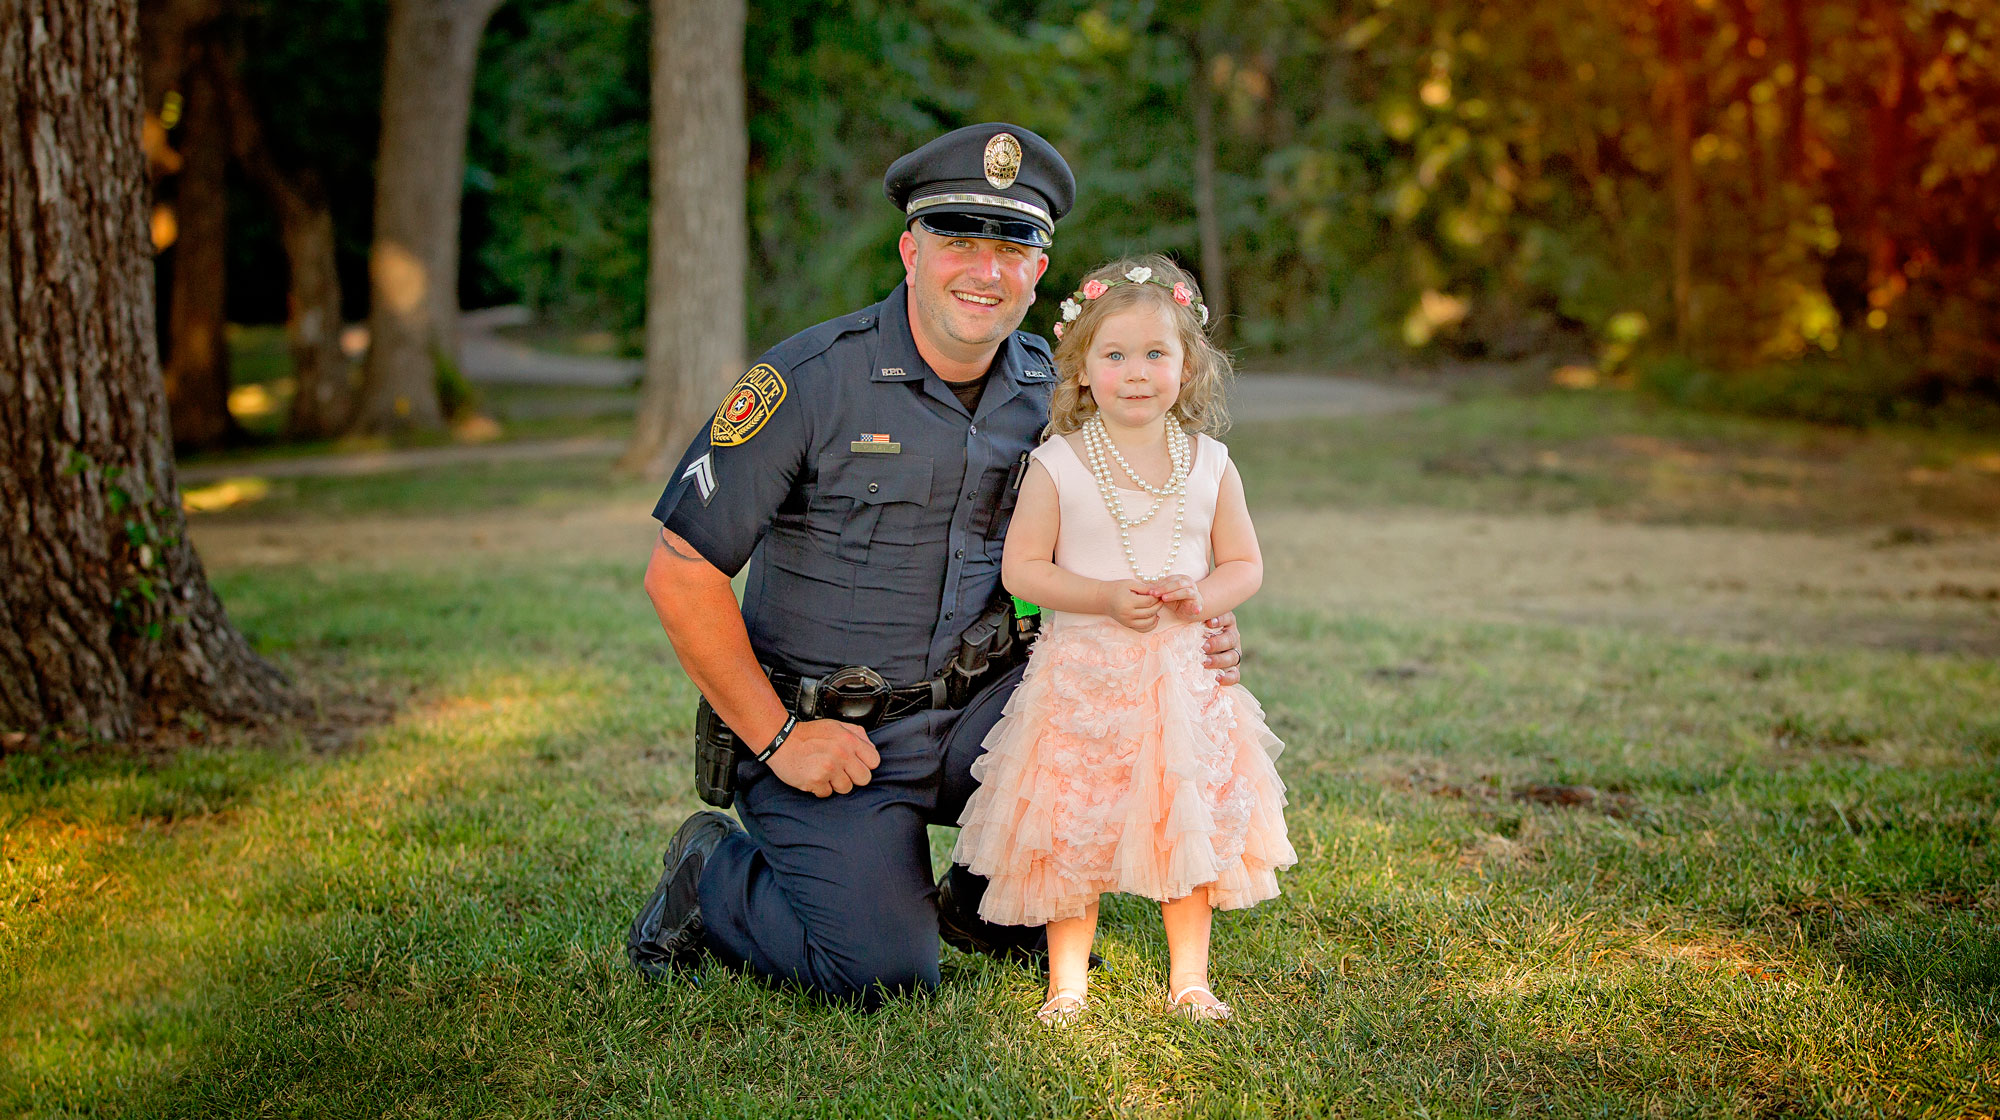 Little Girl Tea Party With Cop